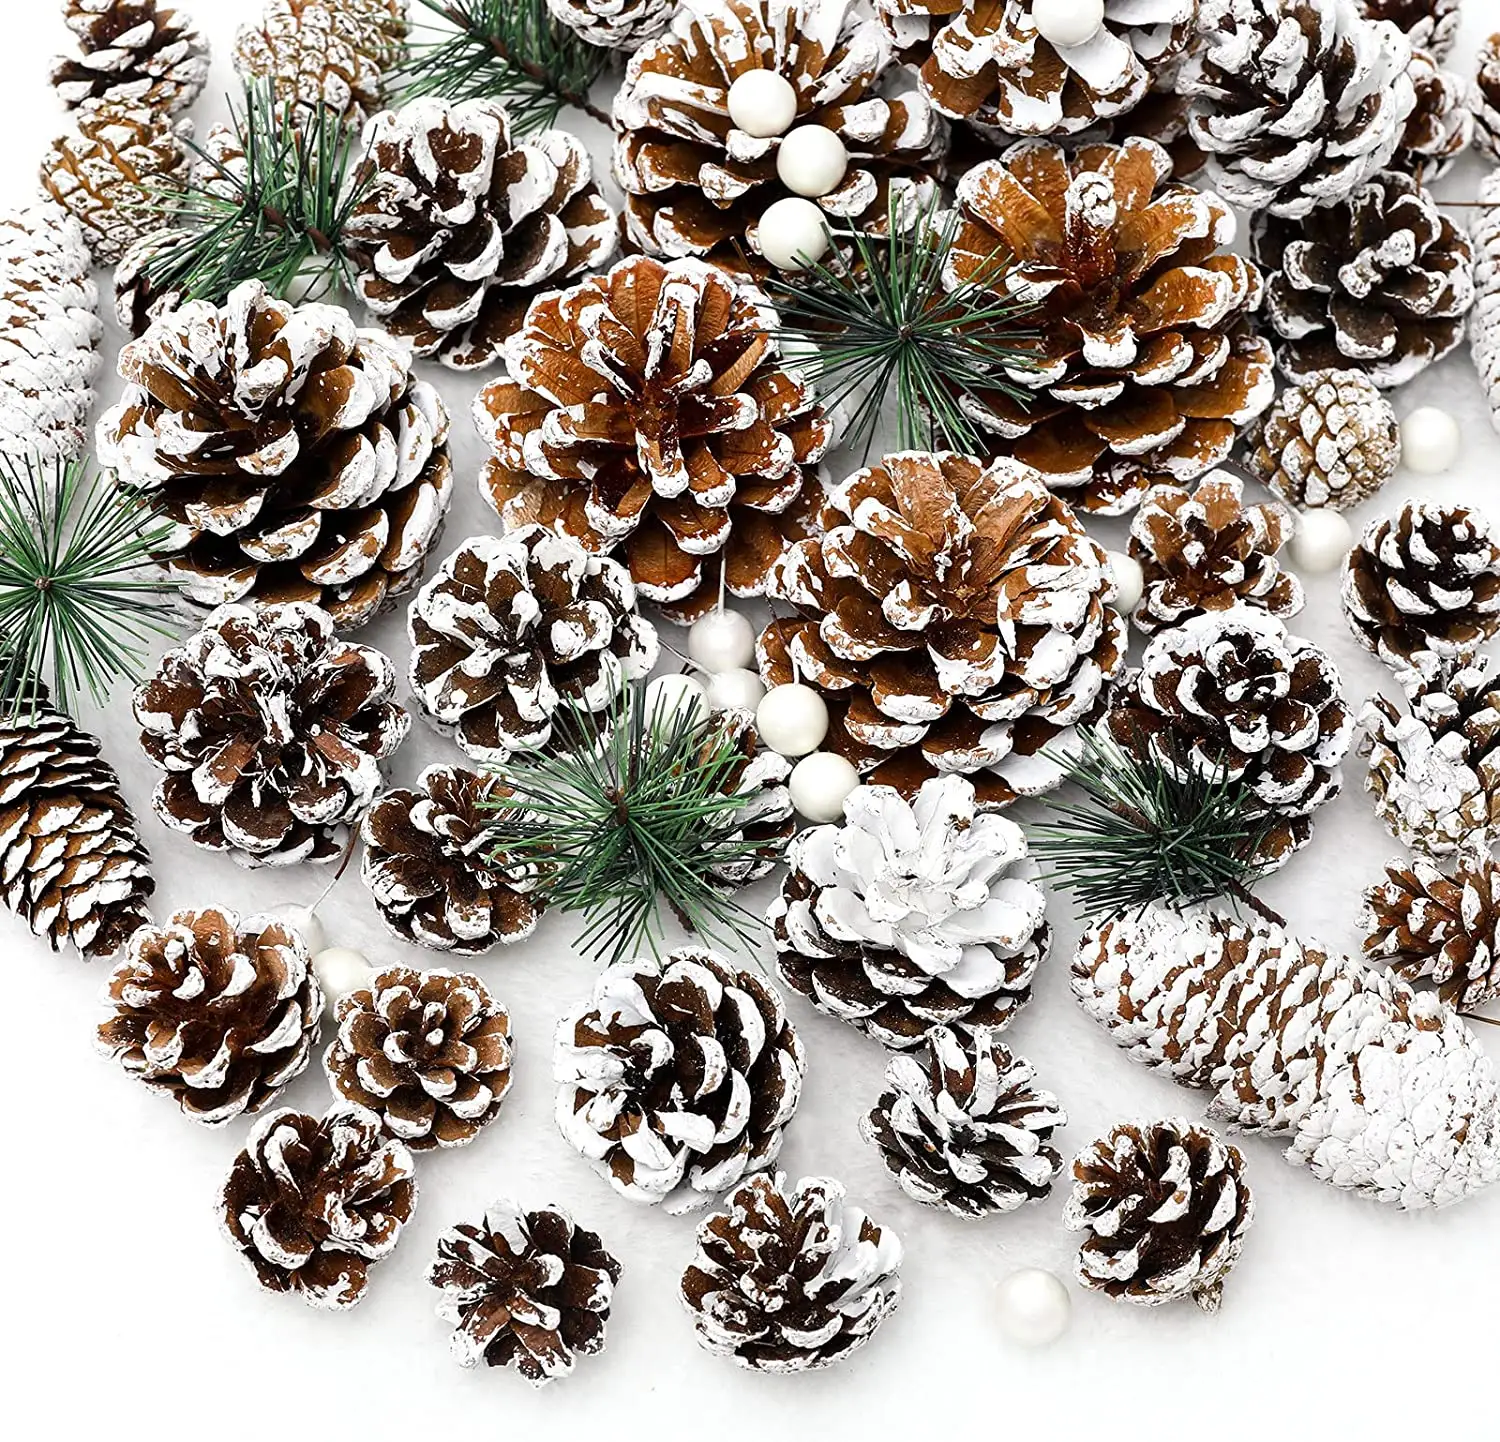 DIY Christmas Pine Cones Berry Pine Branch Set Snow Pinecones Pendant White Winter Holiday Ornament for Xmas Tree Decorations